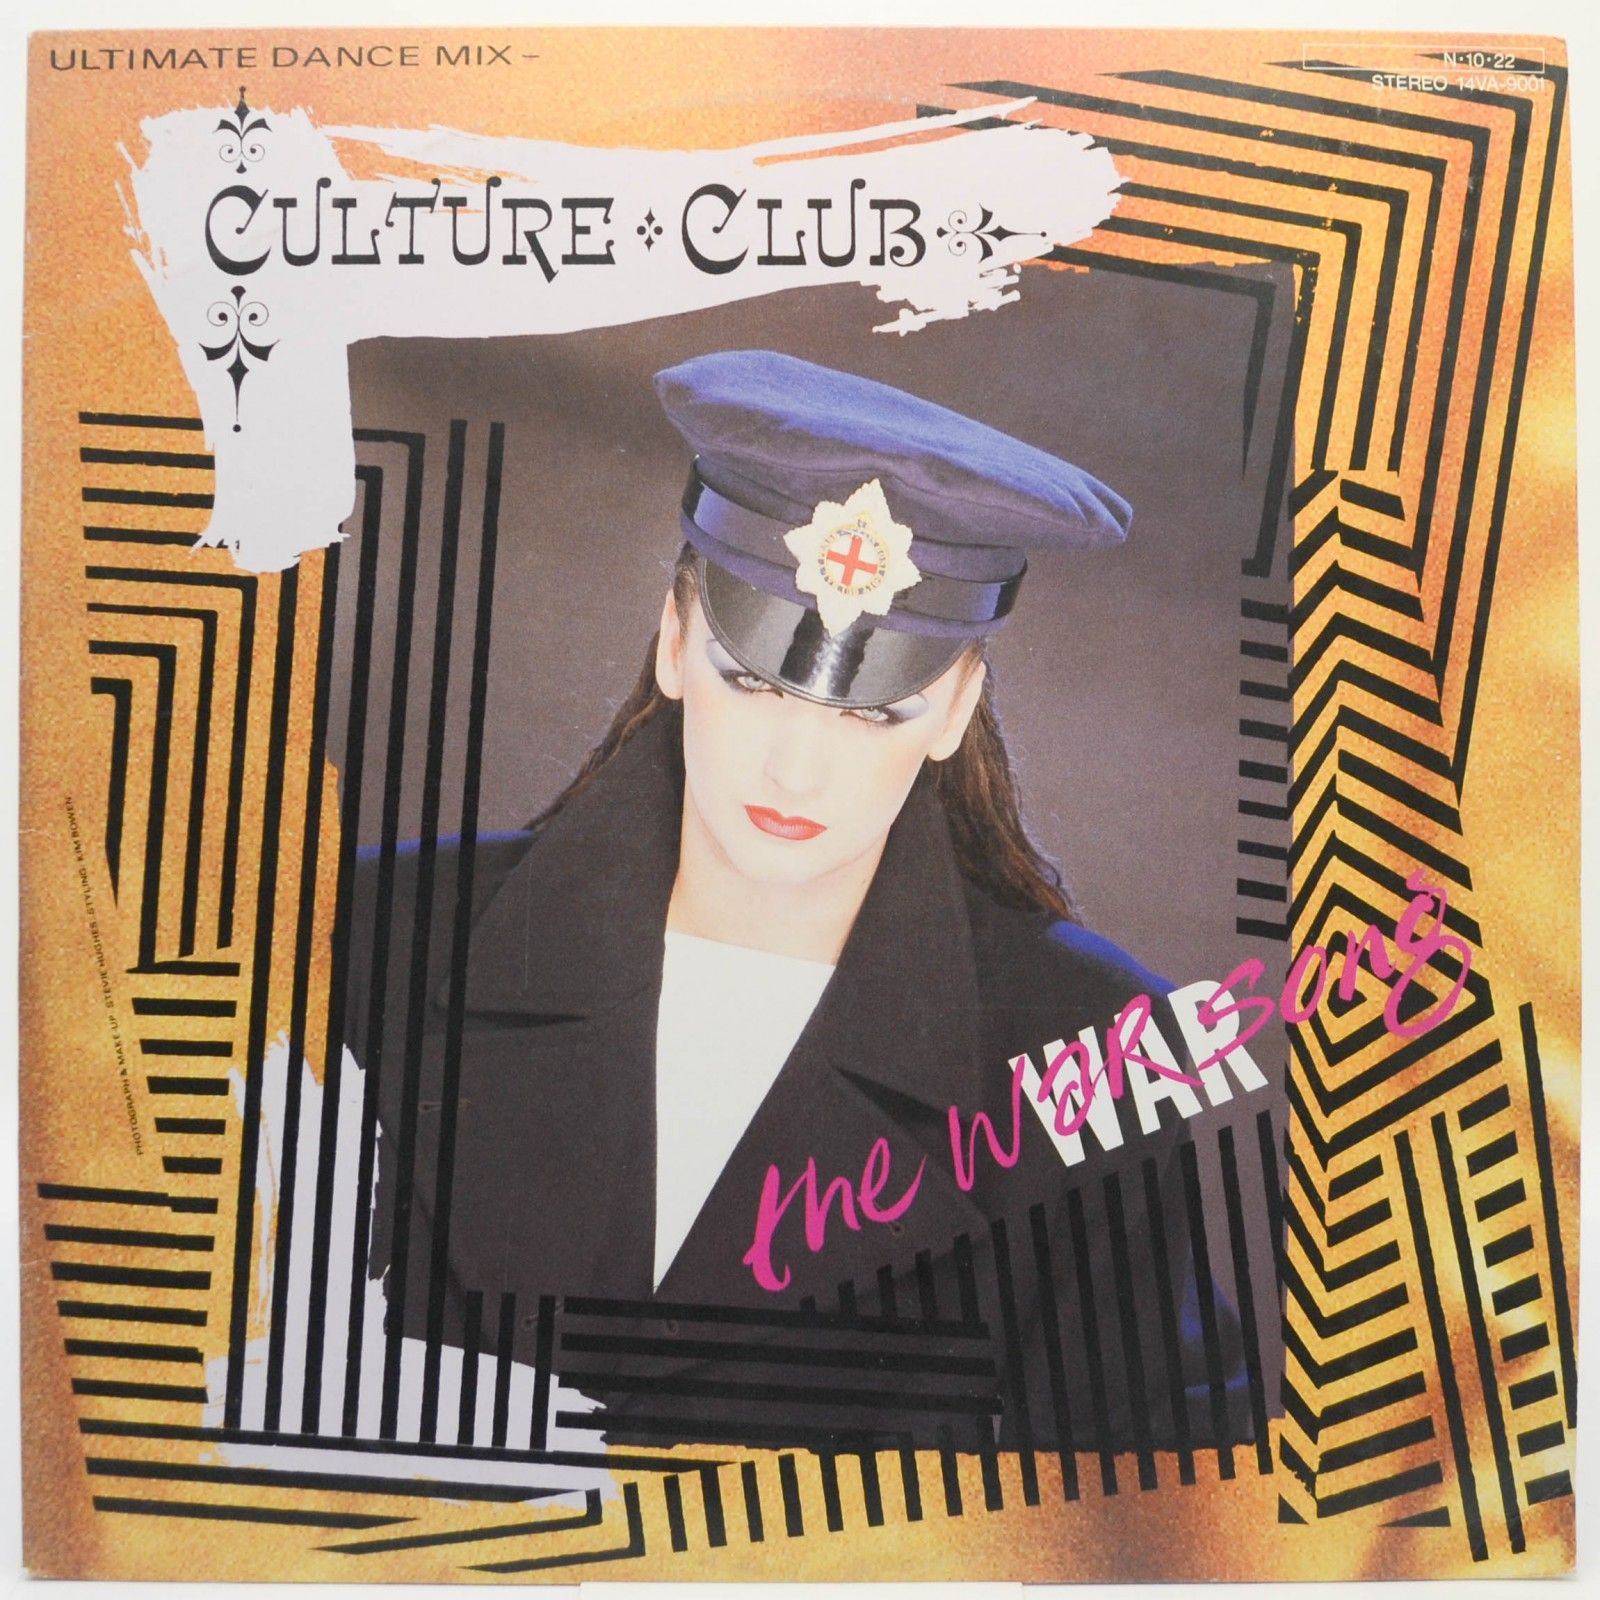 Culture Club — The War Song, 1984